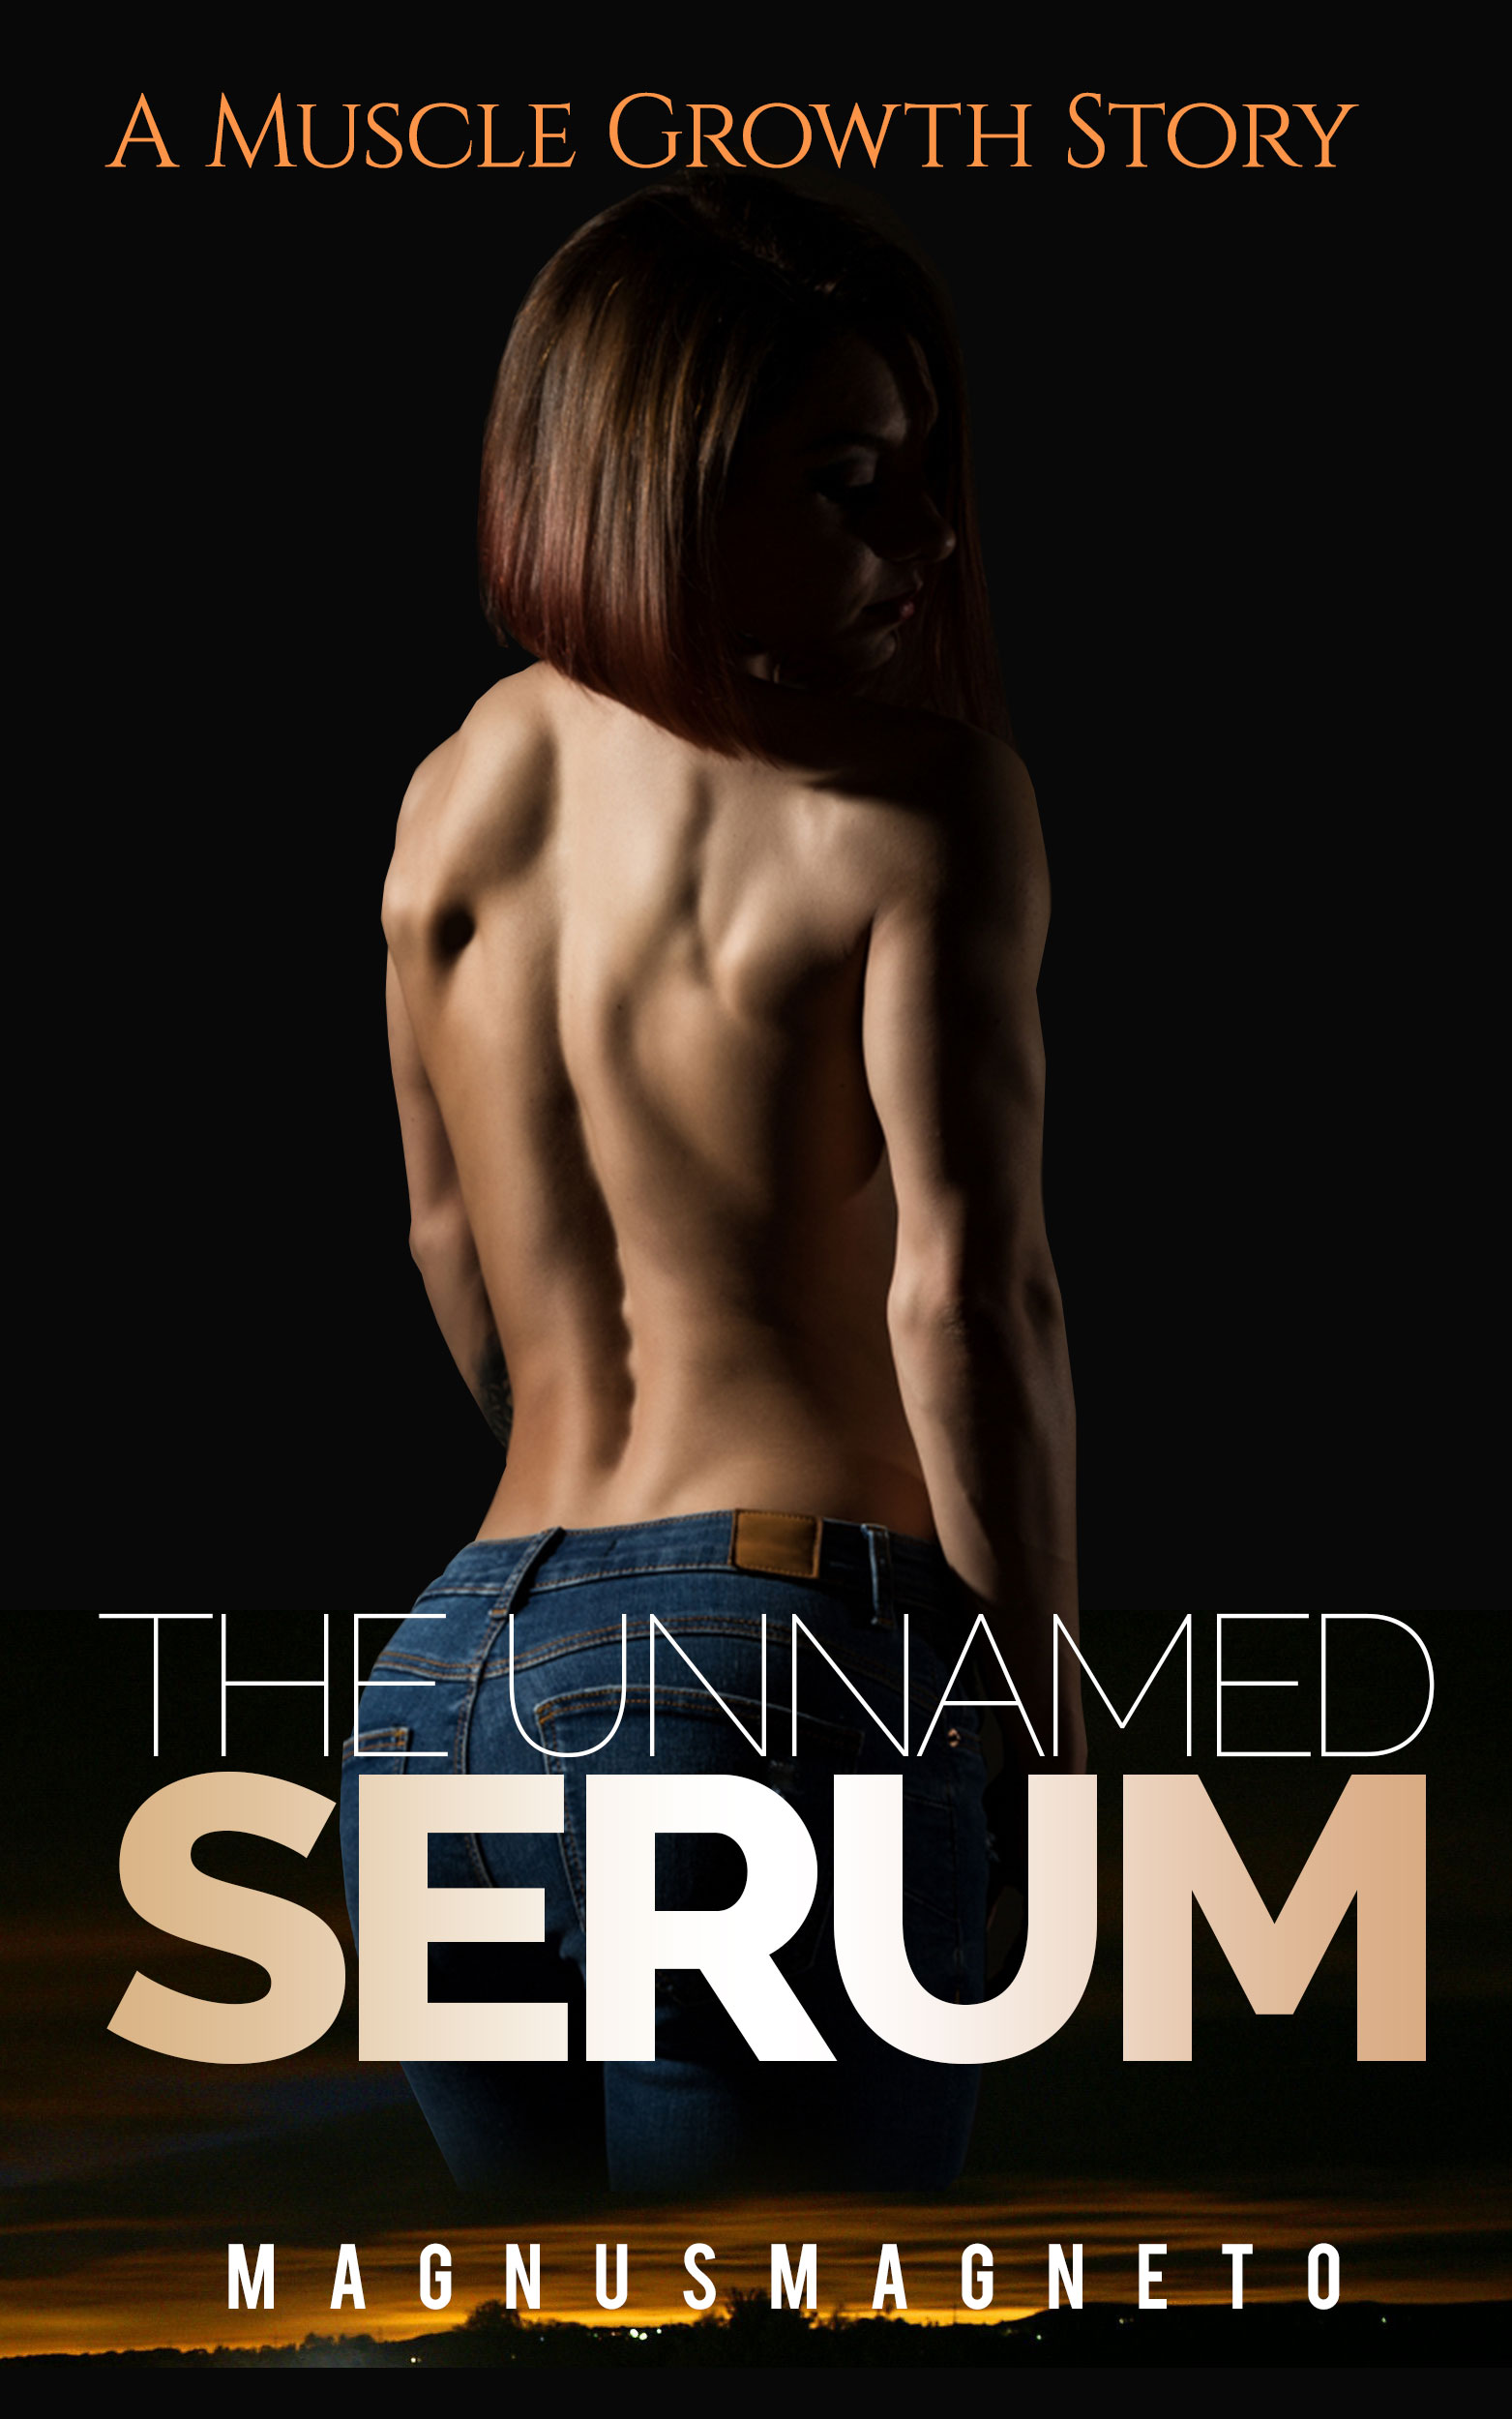 The Unnamed Serum, a female muscle growth story by magnusmagneto